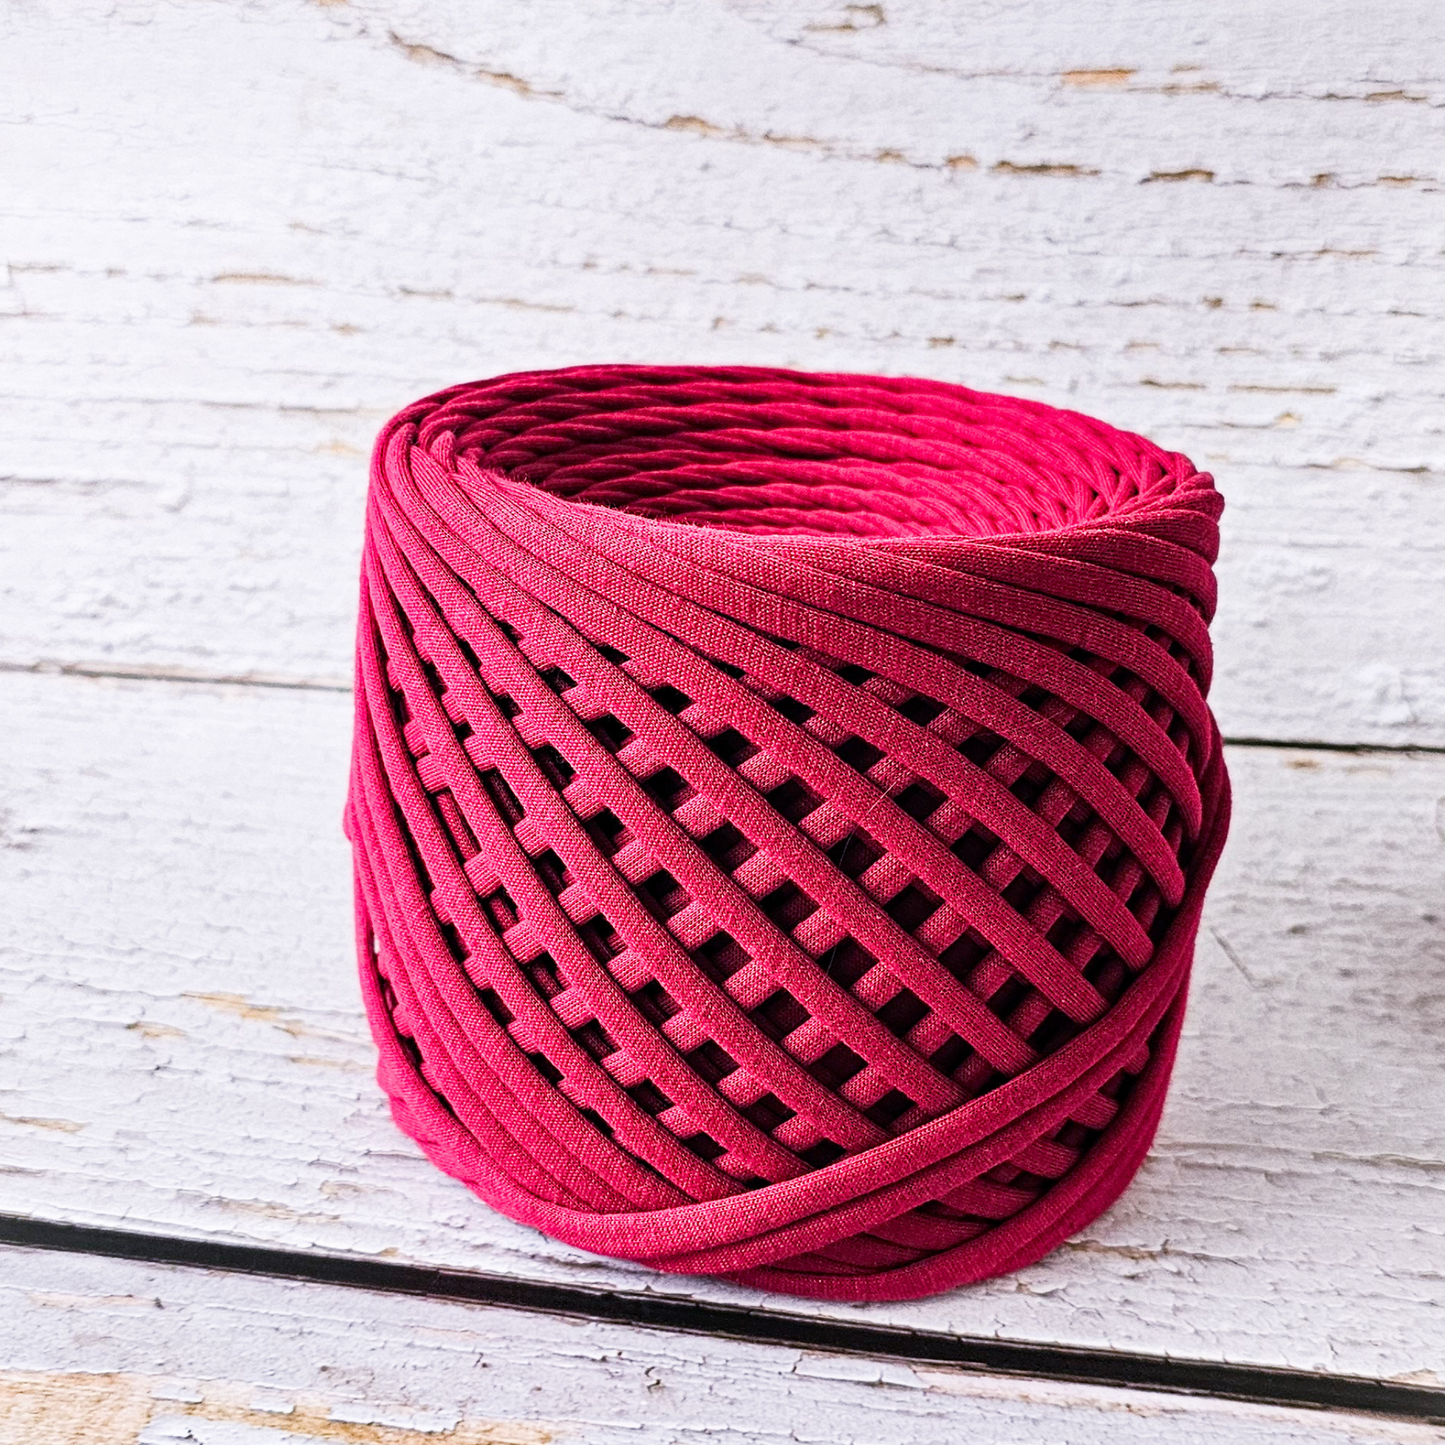 T-shirt yarn for crocheting baskets, bags, rugs and home decor. Berry